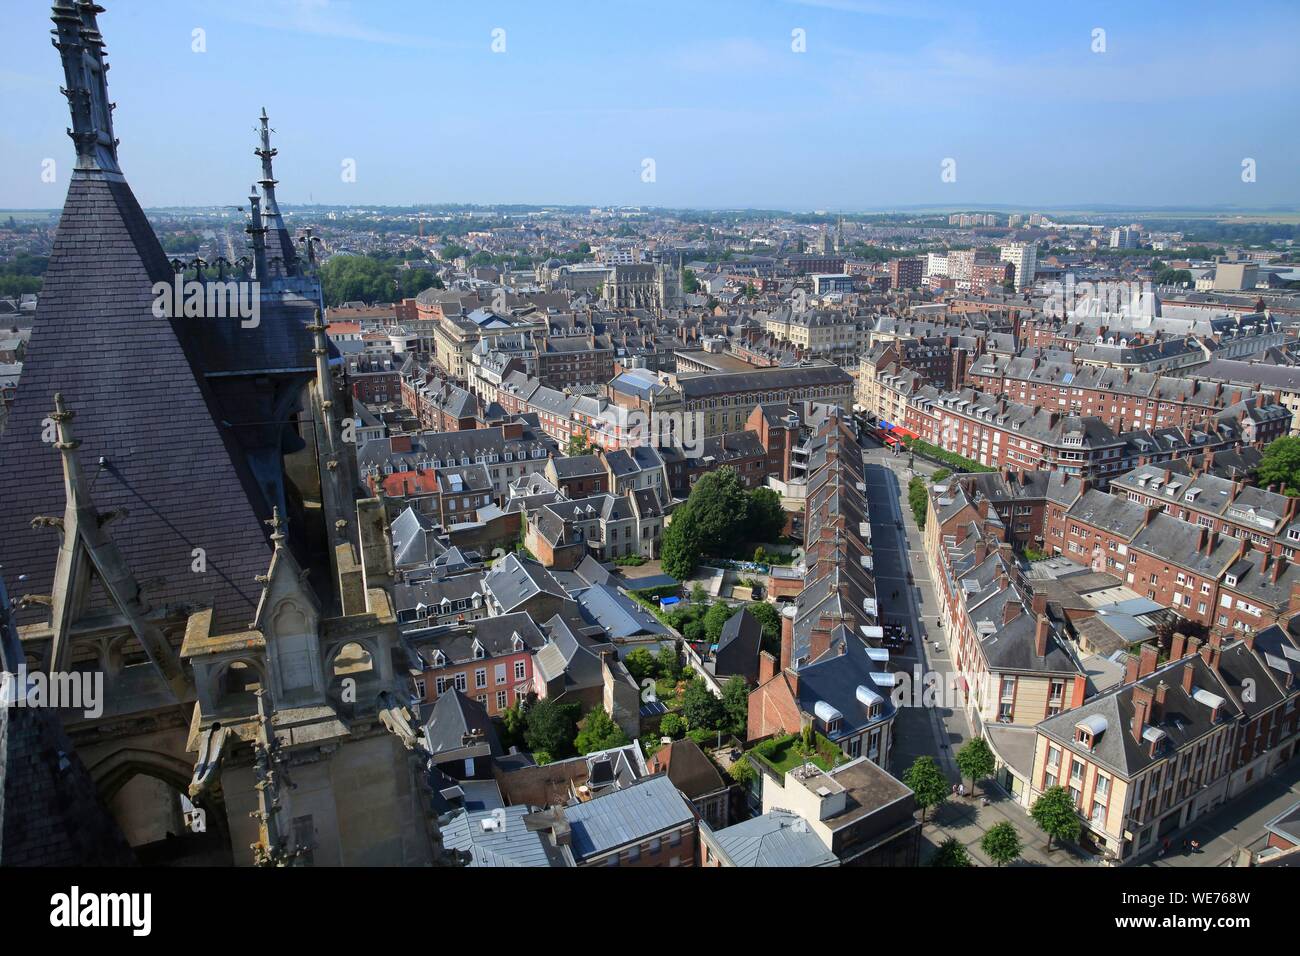 France, Somme, Amiens, View of Amiens from the towers of Amiens Cathedral Stock Photo